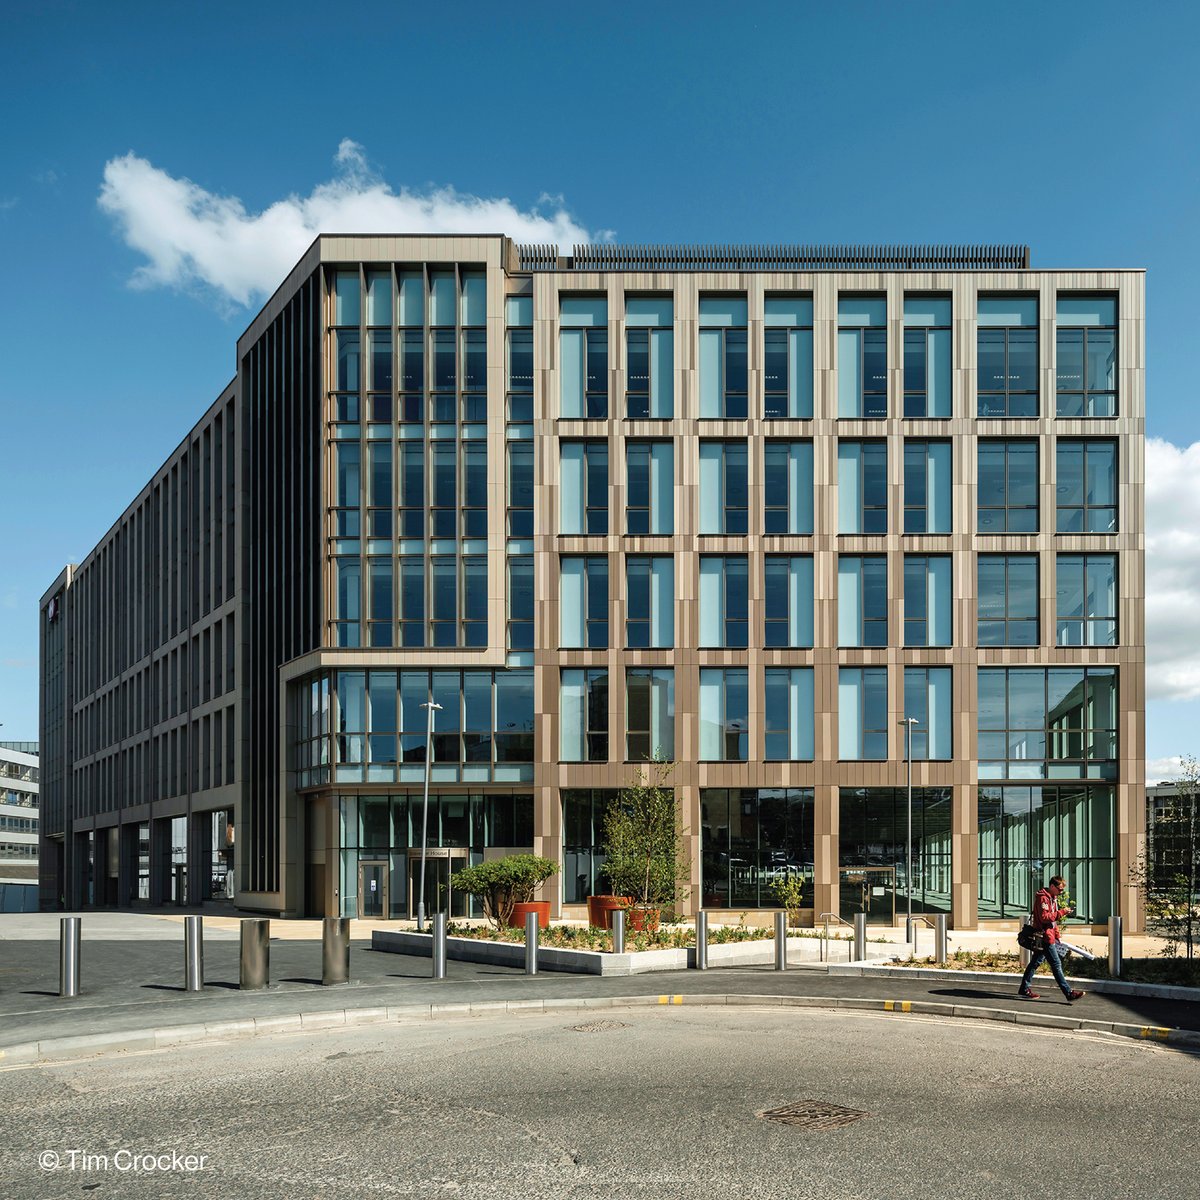 Grosvenor House sets the benchmark for the exceptional quality of @Sheff_HoC2. With wrap-around active frontage at ground floor dramatically transforming the surrounding streets, setting the tone for the vibrant phases of development that were to follow. #architect #Sheffield